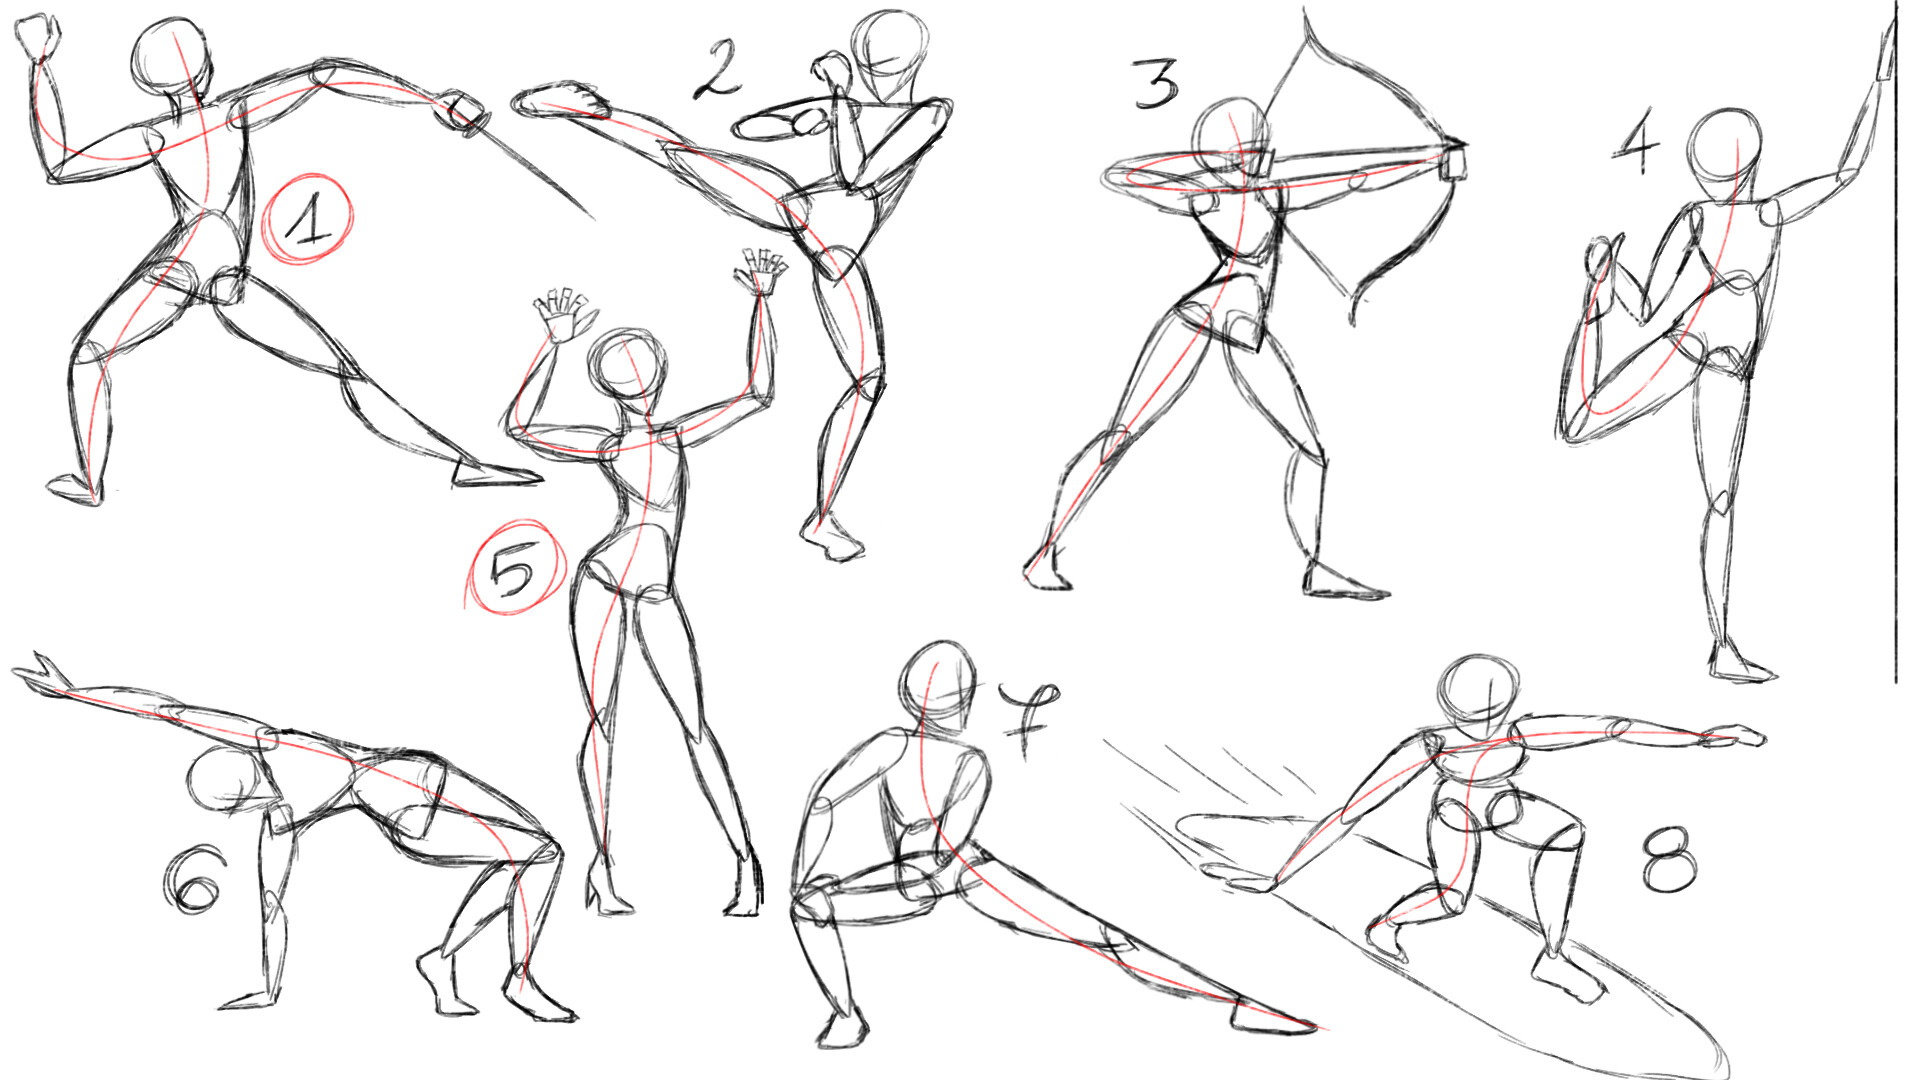 How I Draw Dynamic Poses by Jag6201 on DeviantArt